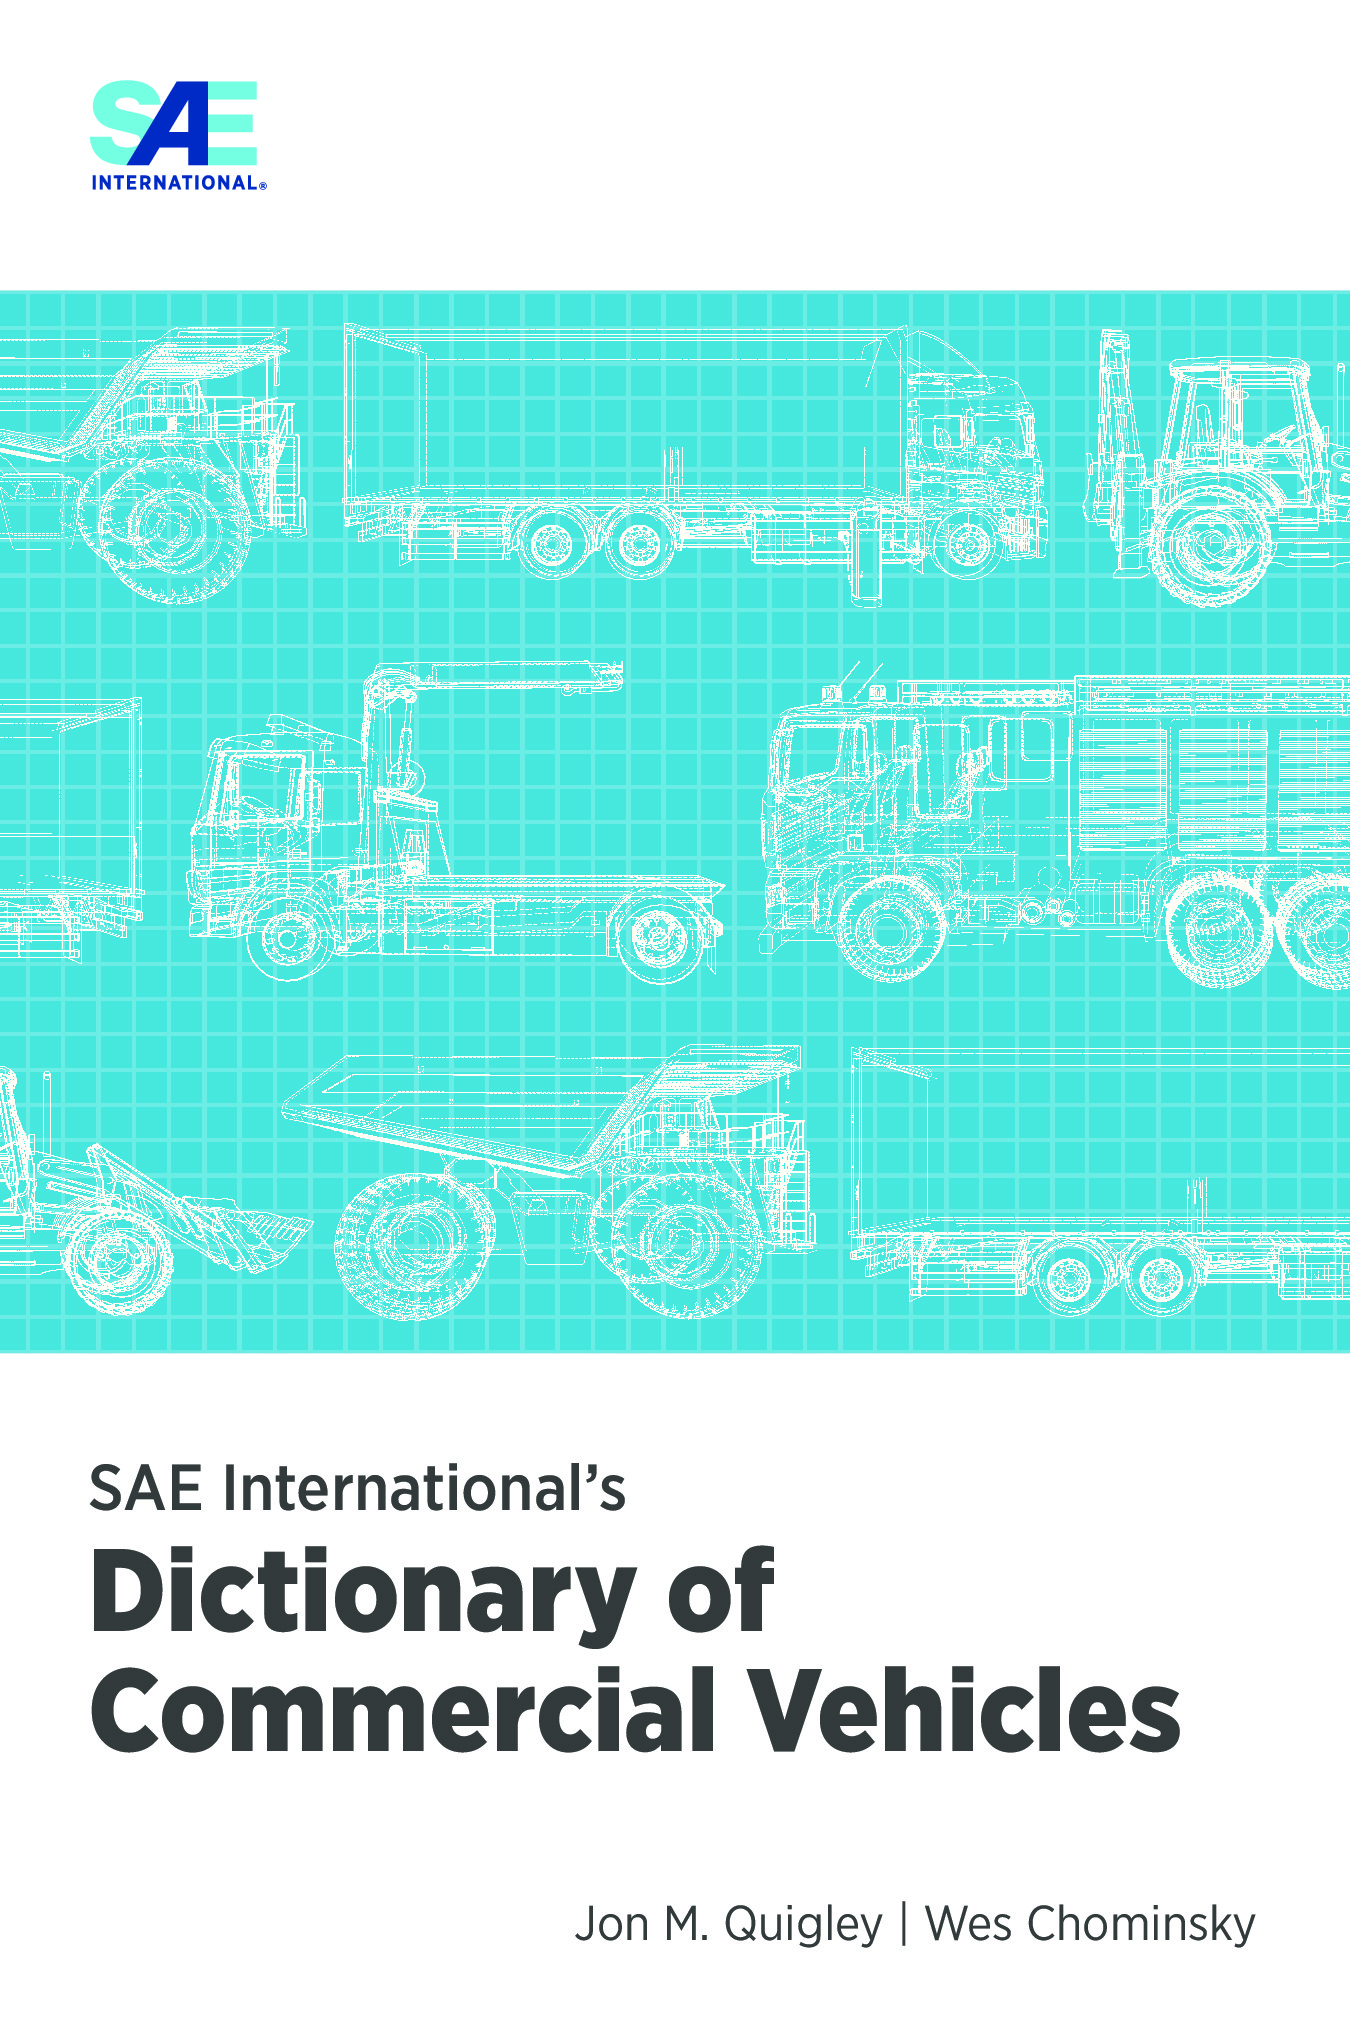 Discover the Pulse of Global Commerce with SAE International’s Dictionary of Commercial Vehicles by Jon M. Quigley